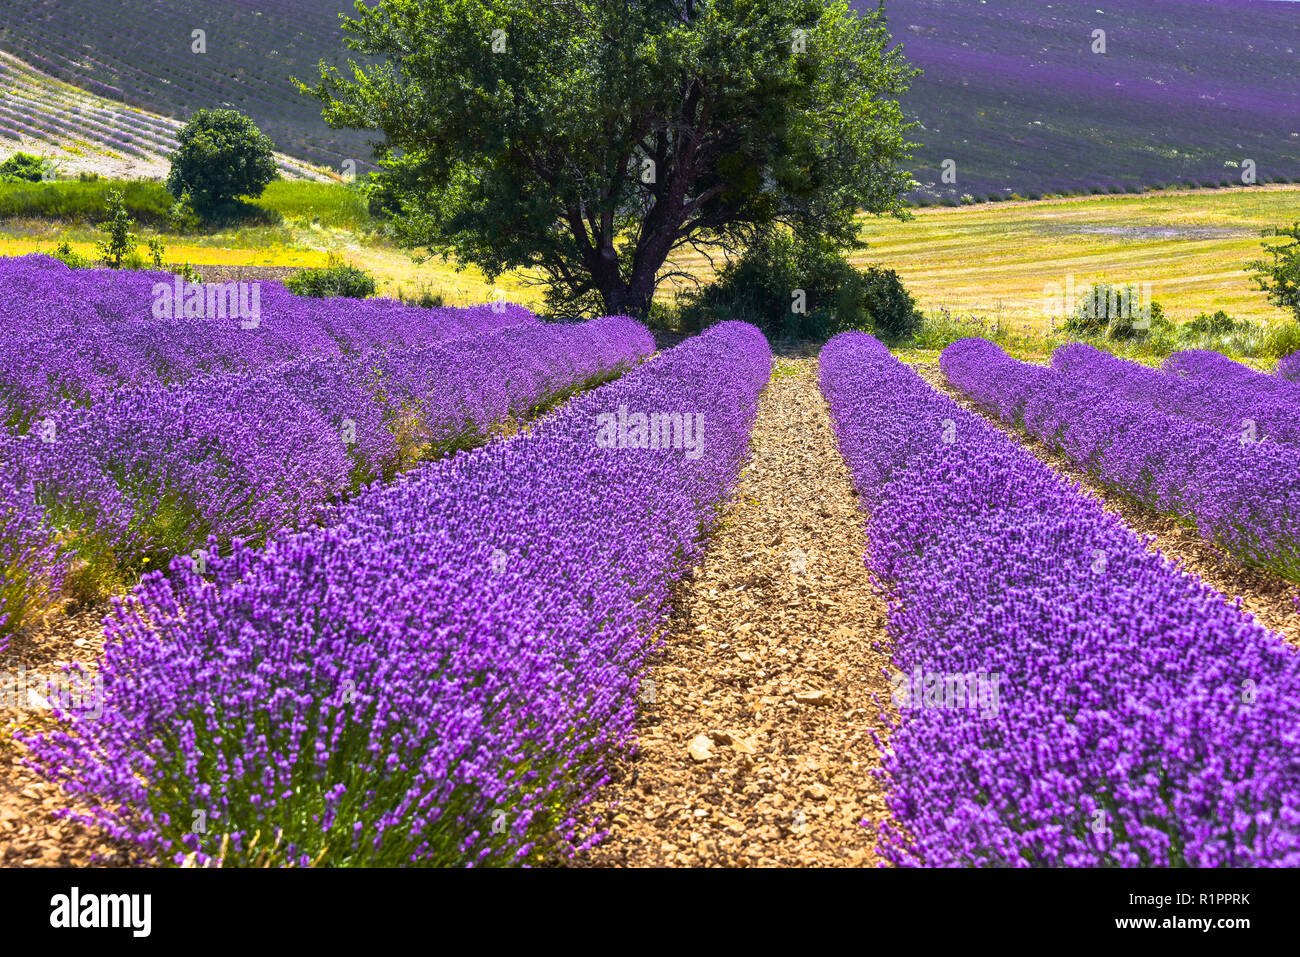 lavender field with landcape and tree, Ferrassières, Provence, France Stock Photo